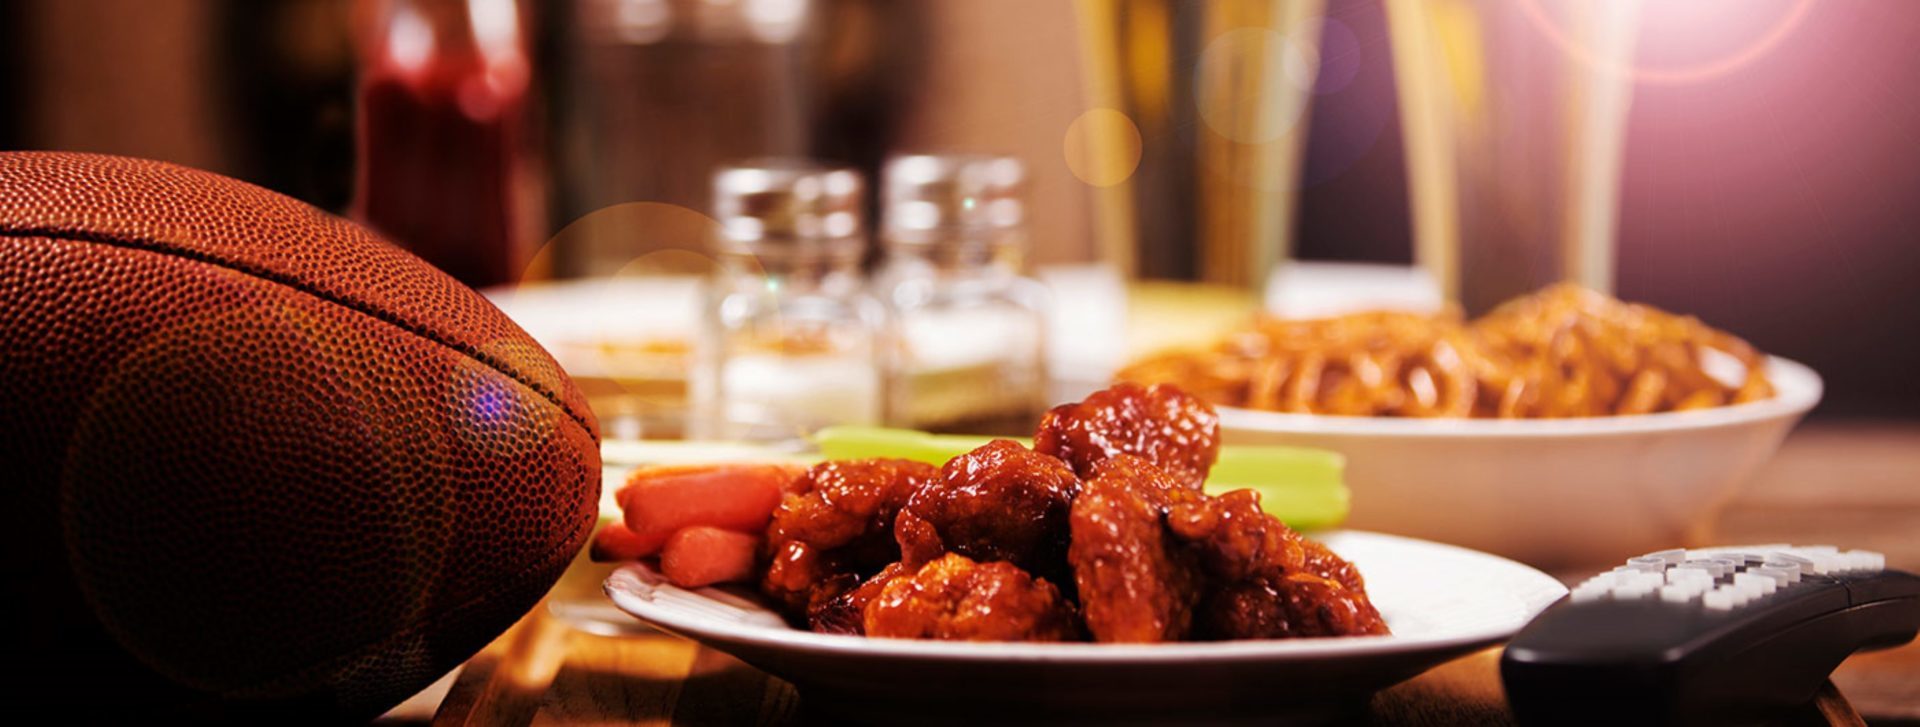 football on table with chicken wings